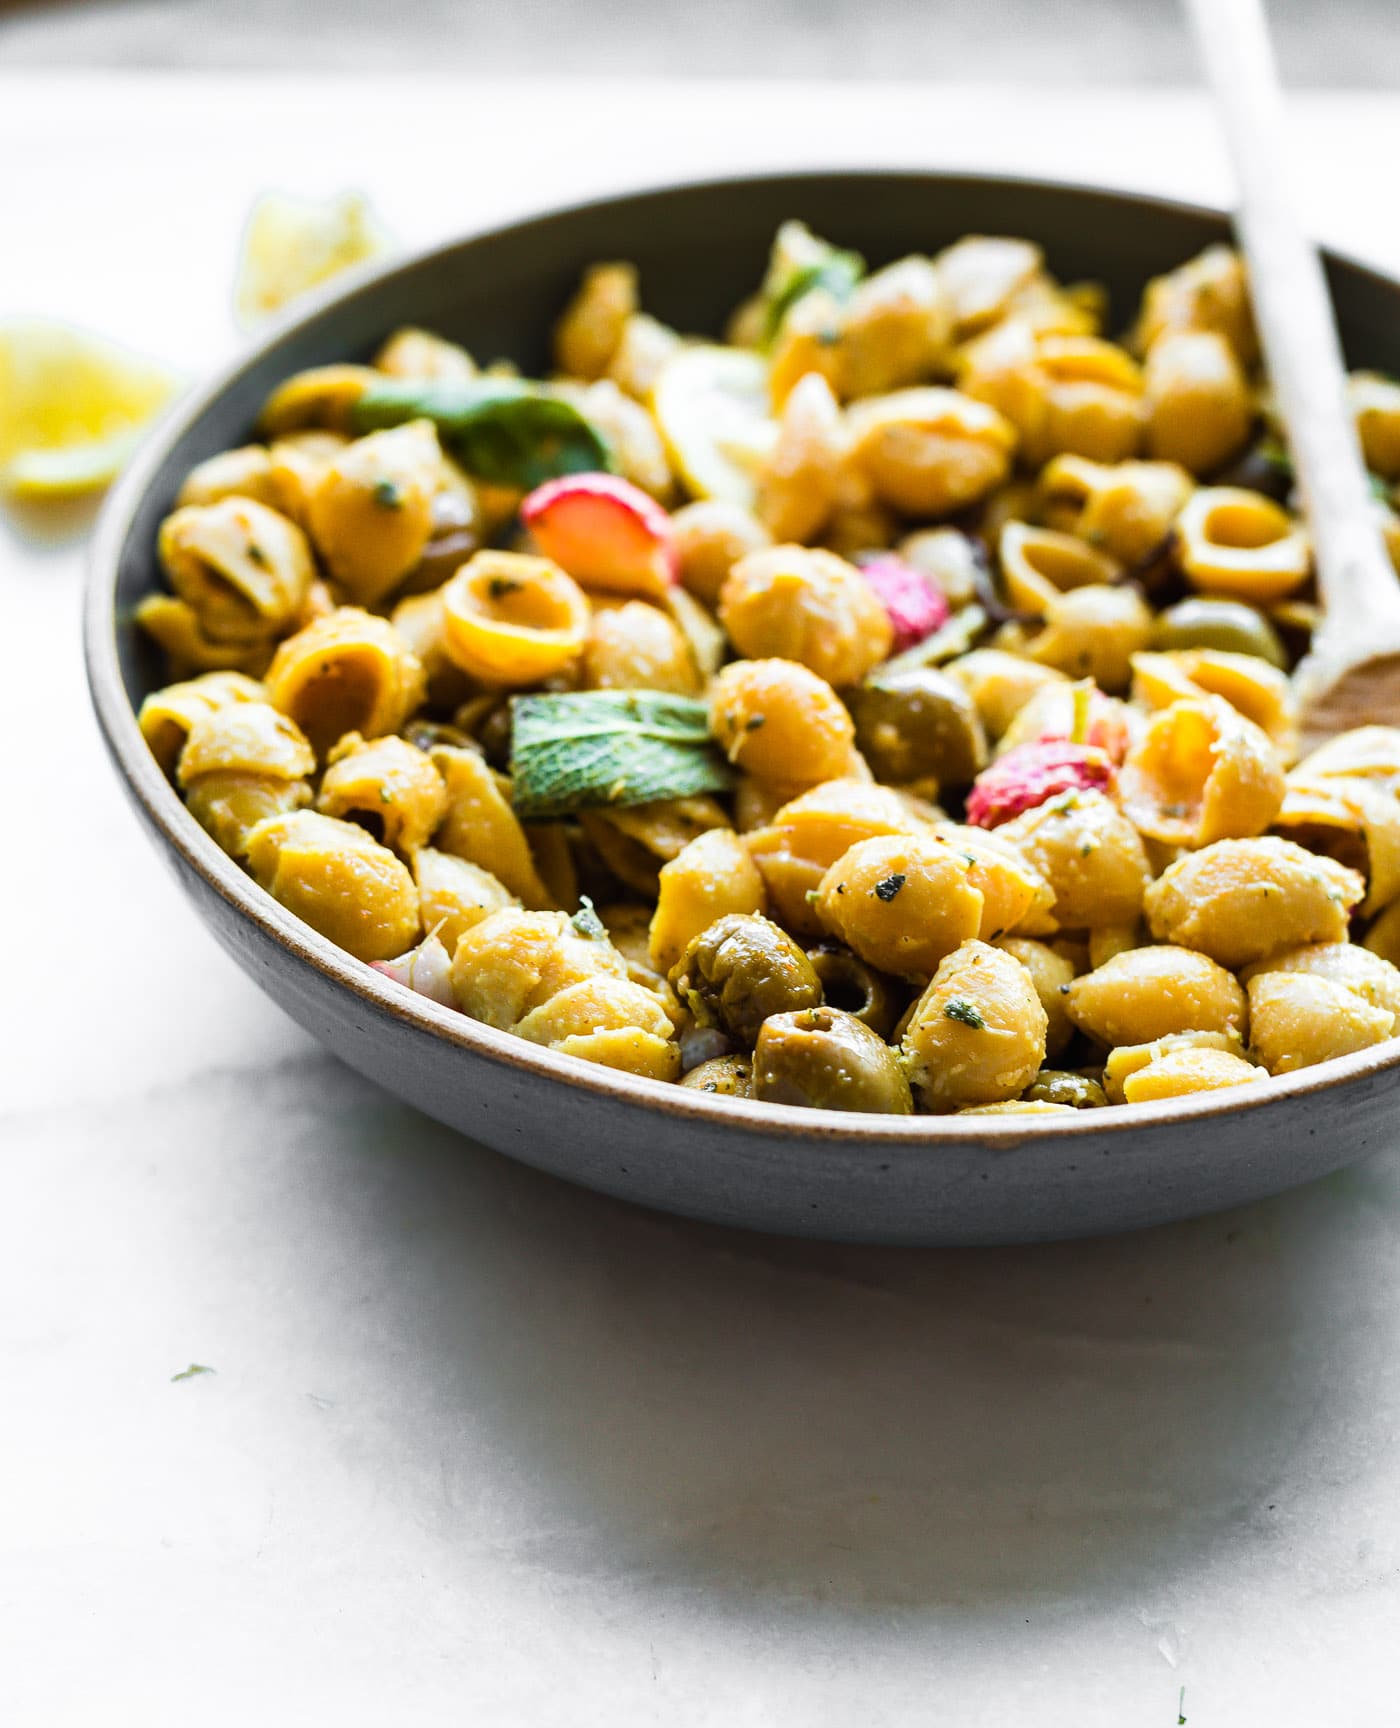 Roasted Radish Lemon Chickpea Pasta with olives! This vegan chickpea pasta recipe is packed with lemony flavor, making it the perfect light, gluten free pasta dinner for summer! #dinner #vegan #pasta #cleaneating #healthy #dairyfree #healthyrecipes